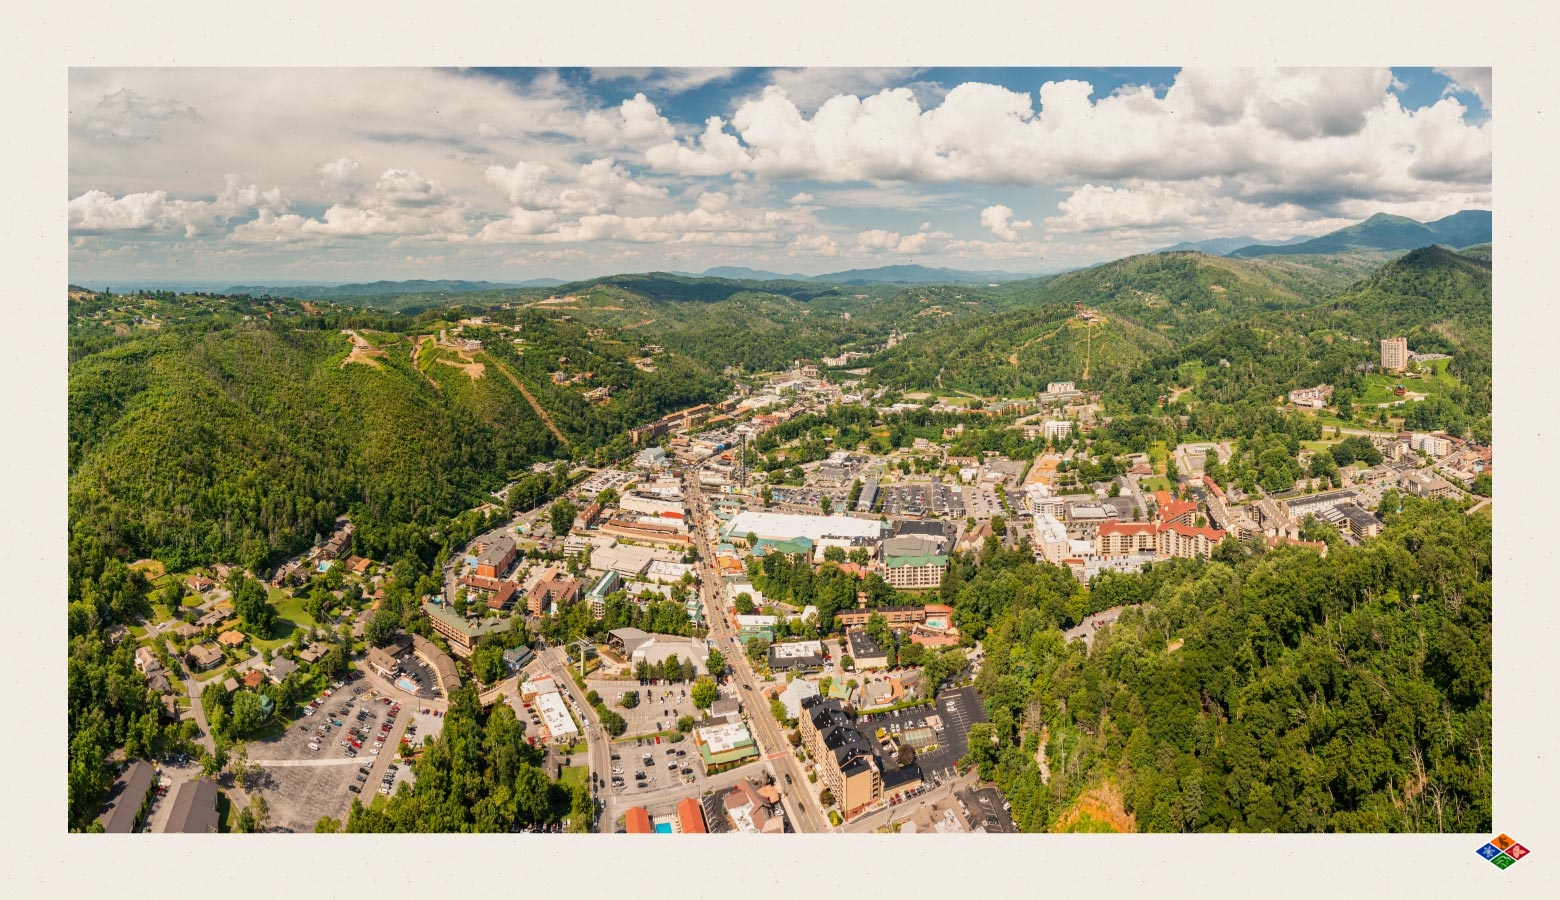 Gatlinburg is the ideal place to visit for your bachelorette party.